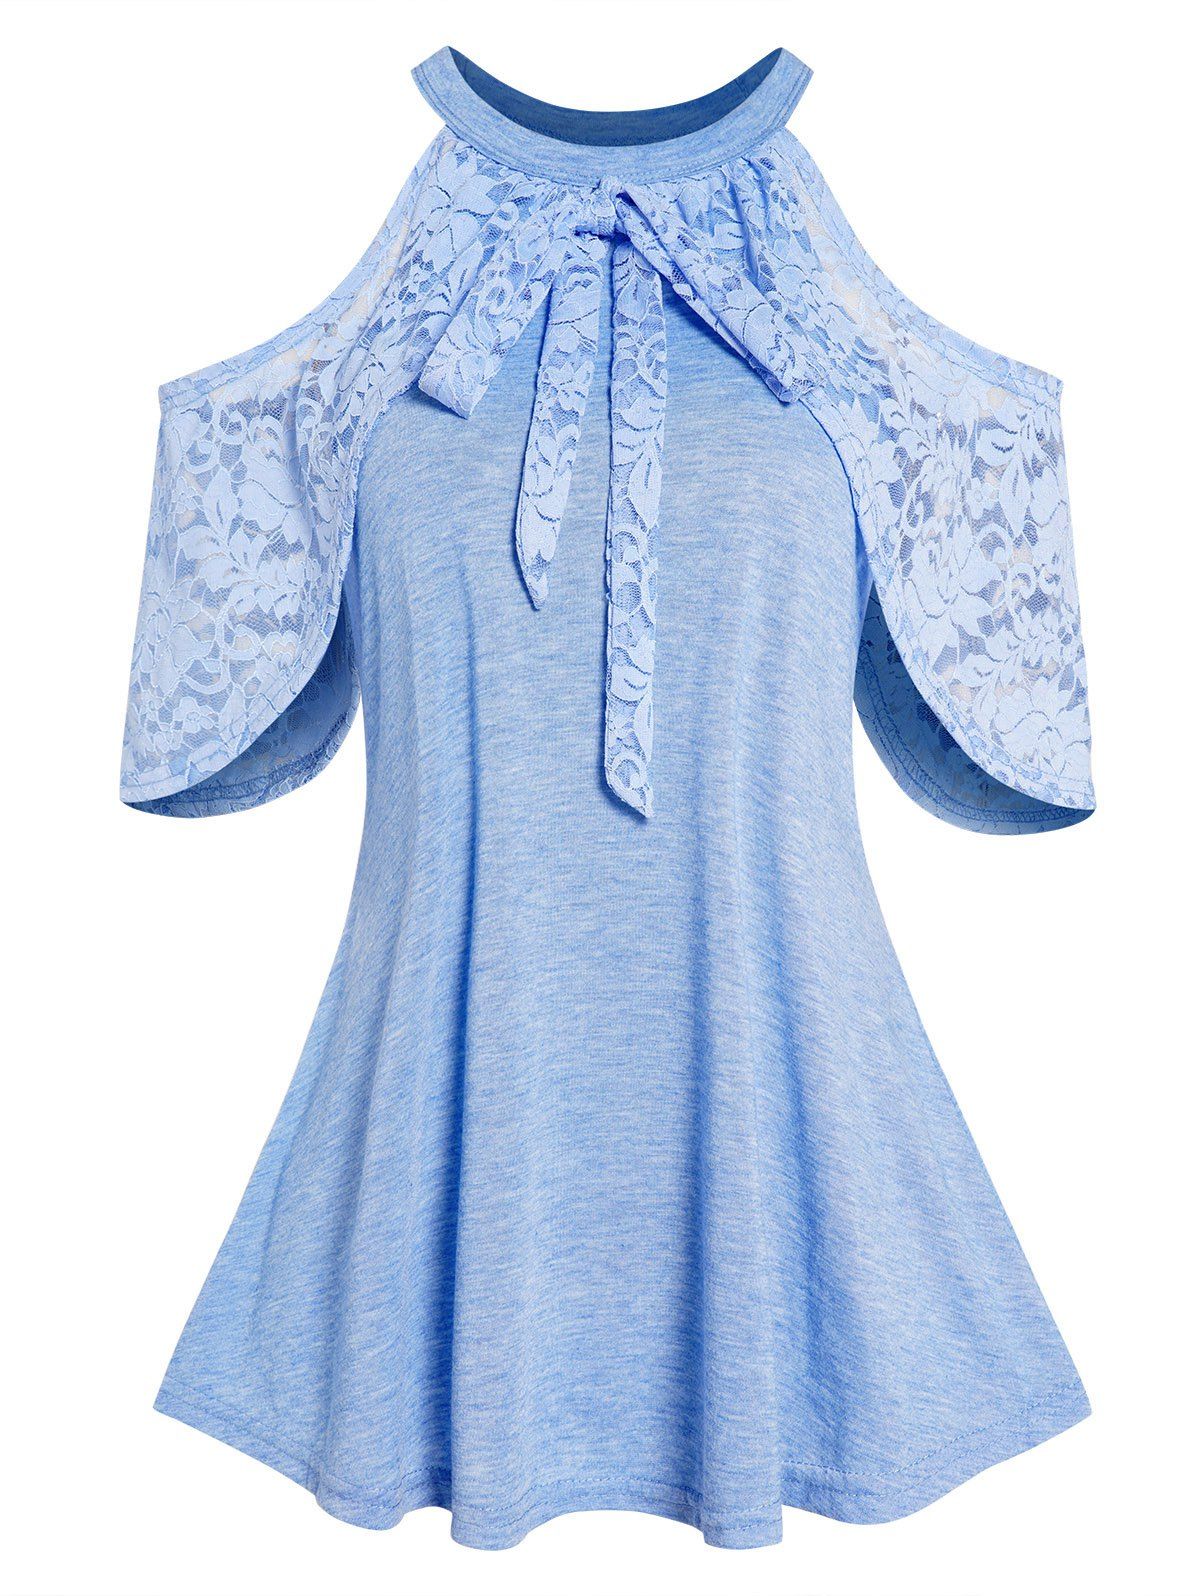 Cold Shoulder Lace Bowknot Top Short Sleeve Round Neck Casual Top - LIGHT BLUE XXL